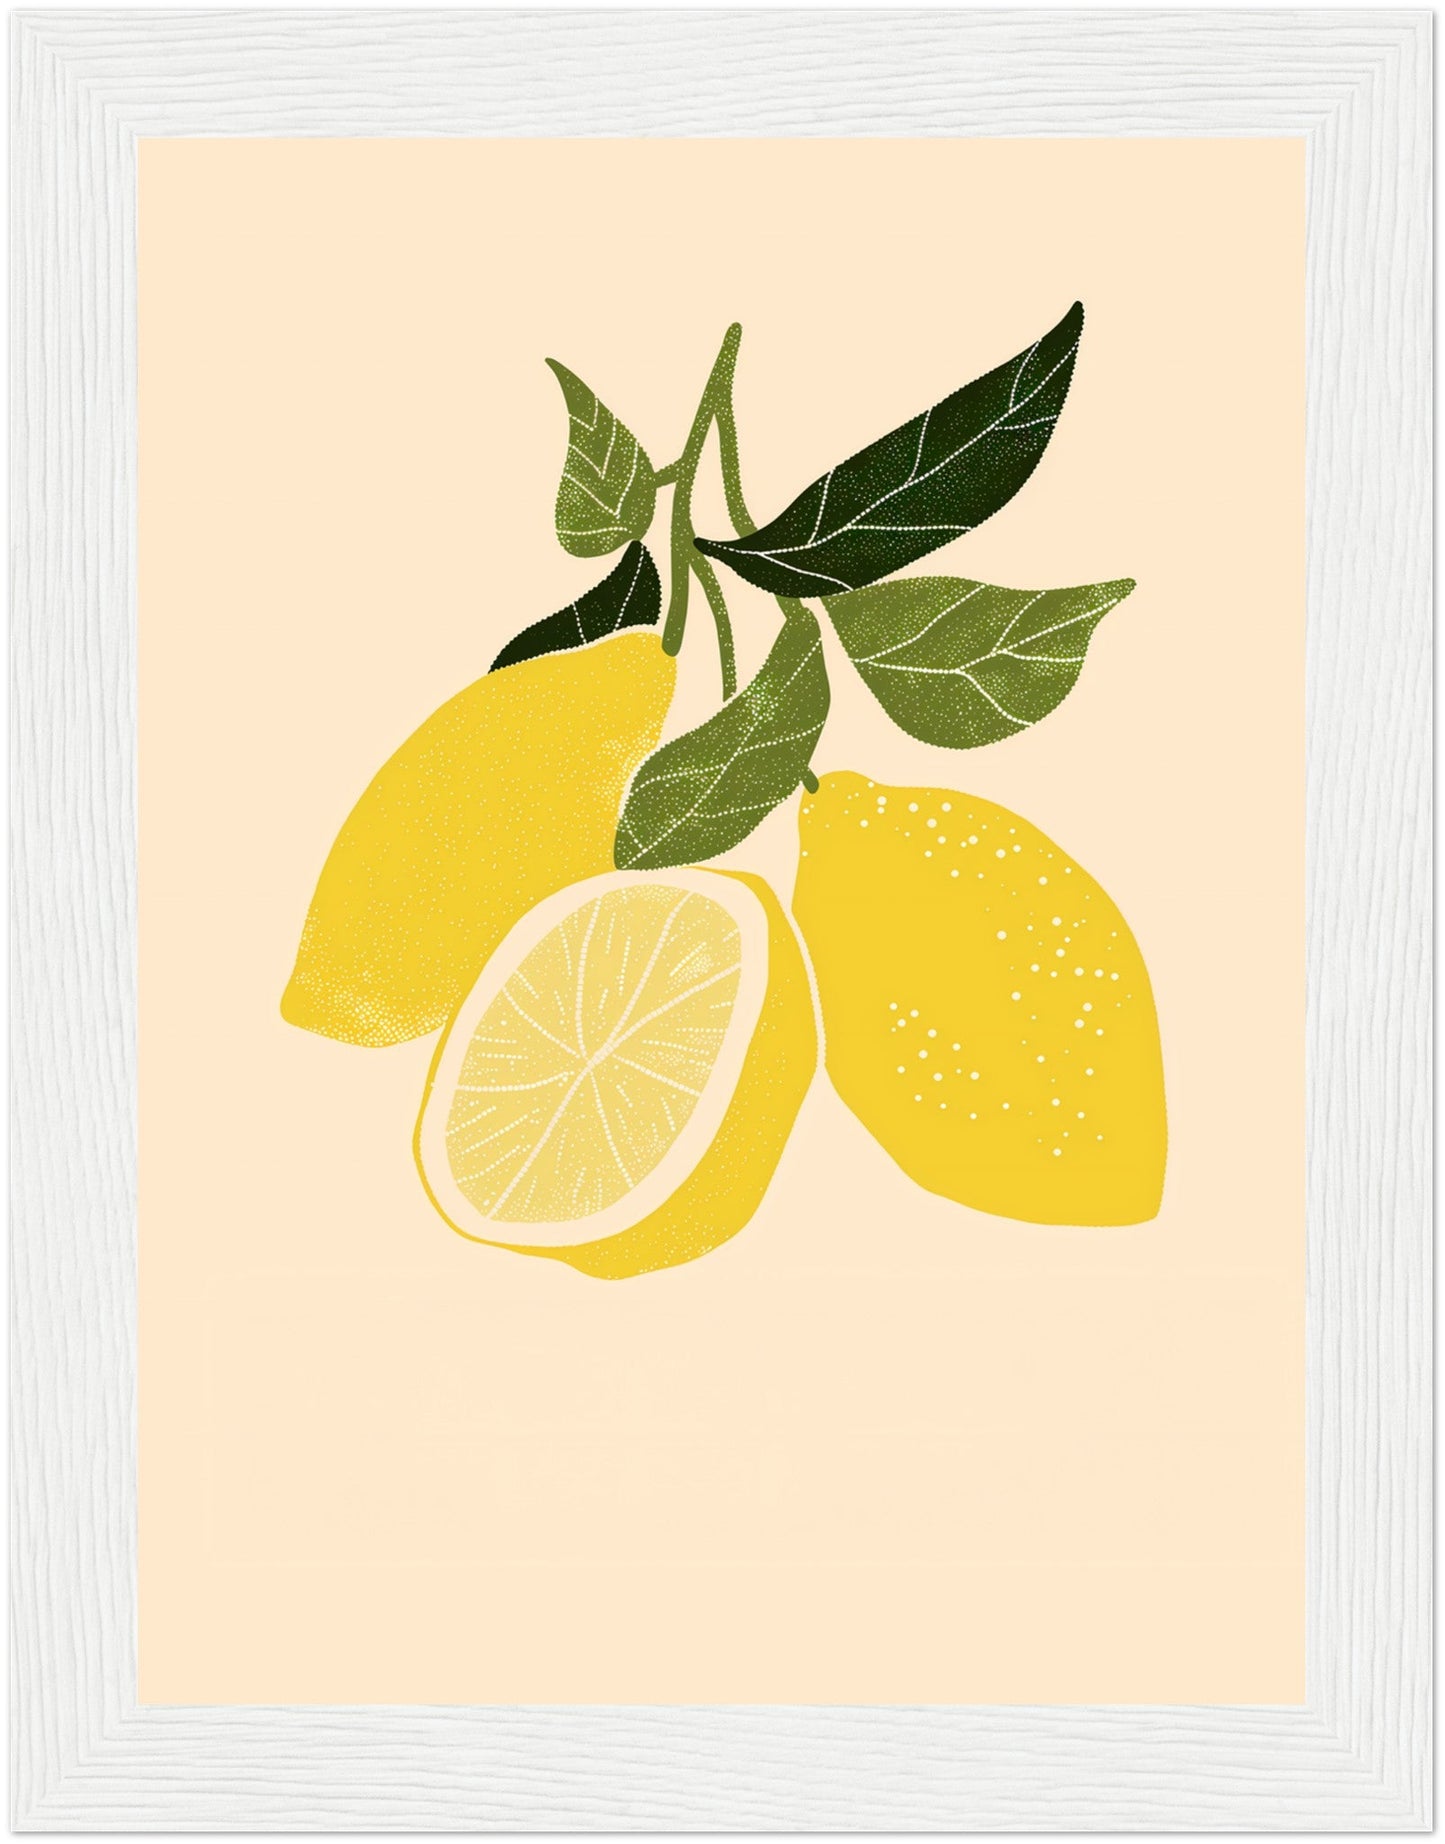 Illustration of yellow lemons with leaves in a brown frame.